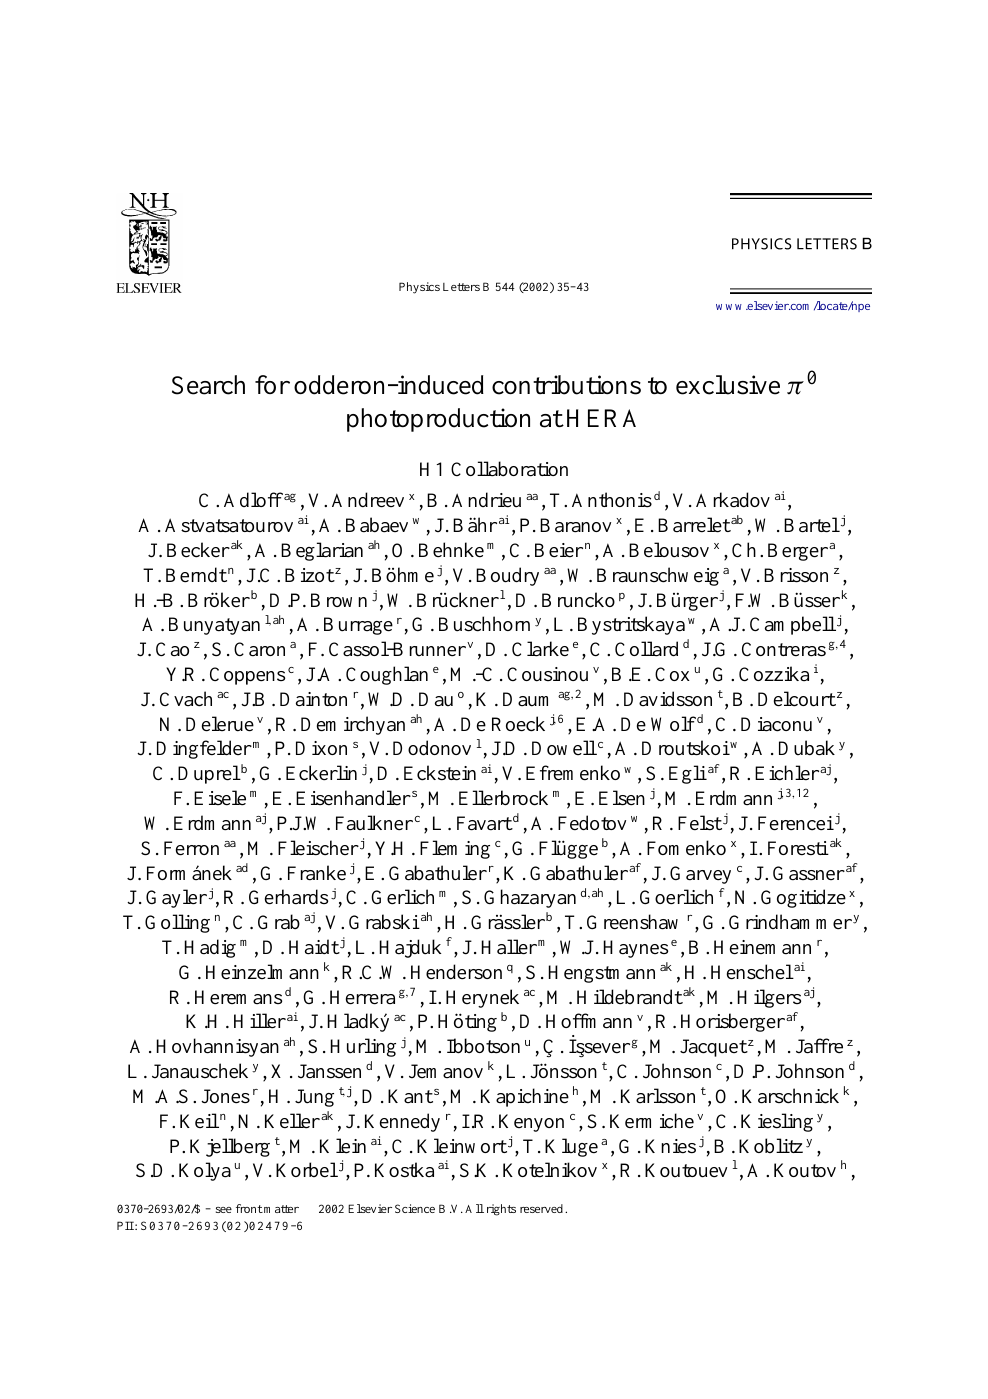 Search For Odderon Induced Contributions To Exclusive P0 Photoproduction At Hera Topic Of Research Paper In Physical Sciences Download Scholarly Article Pdf And Read For Free On Cyberleninka Open Science Hub